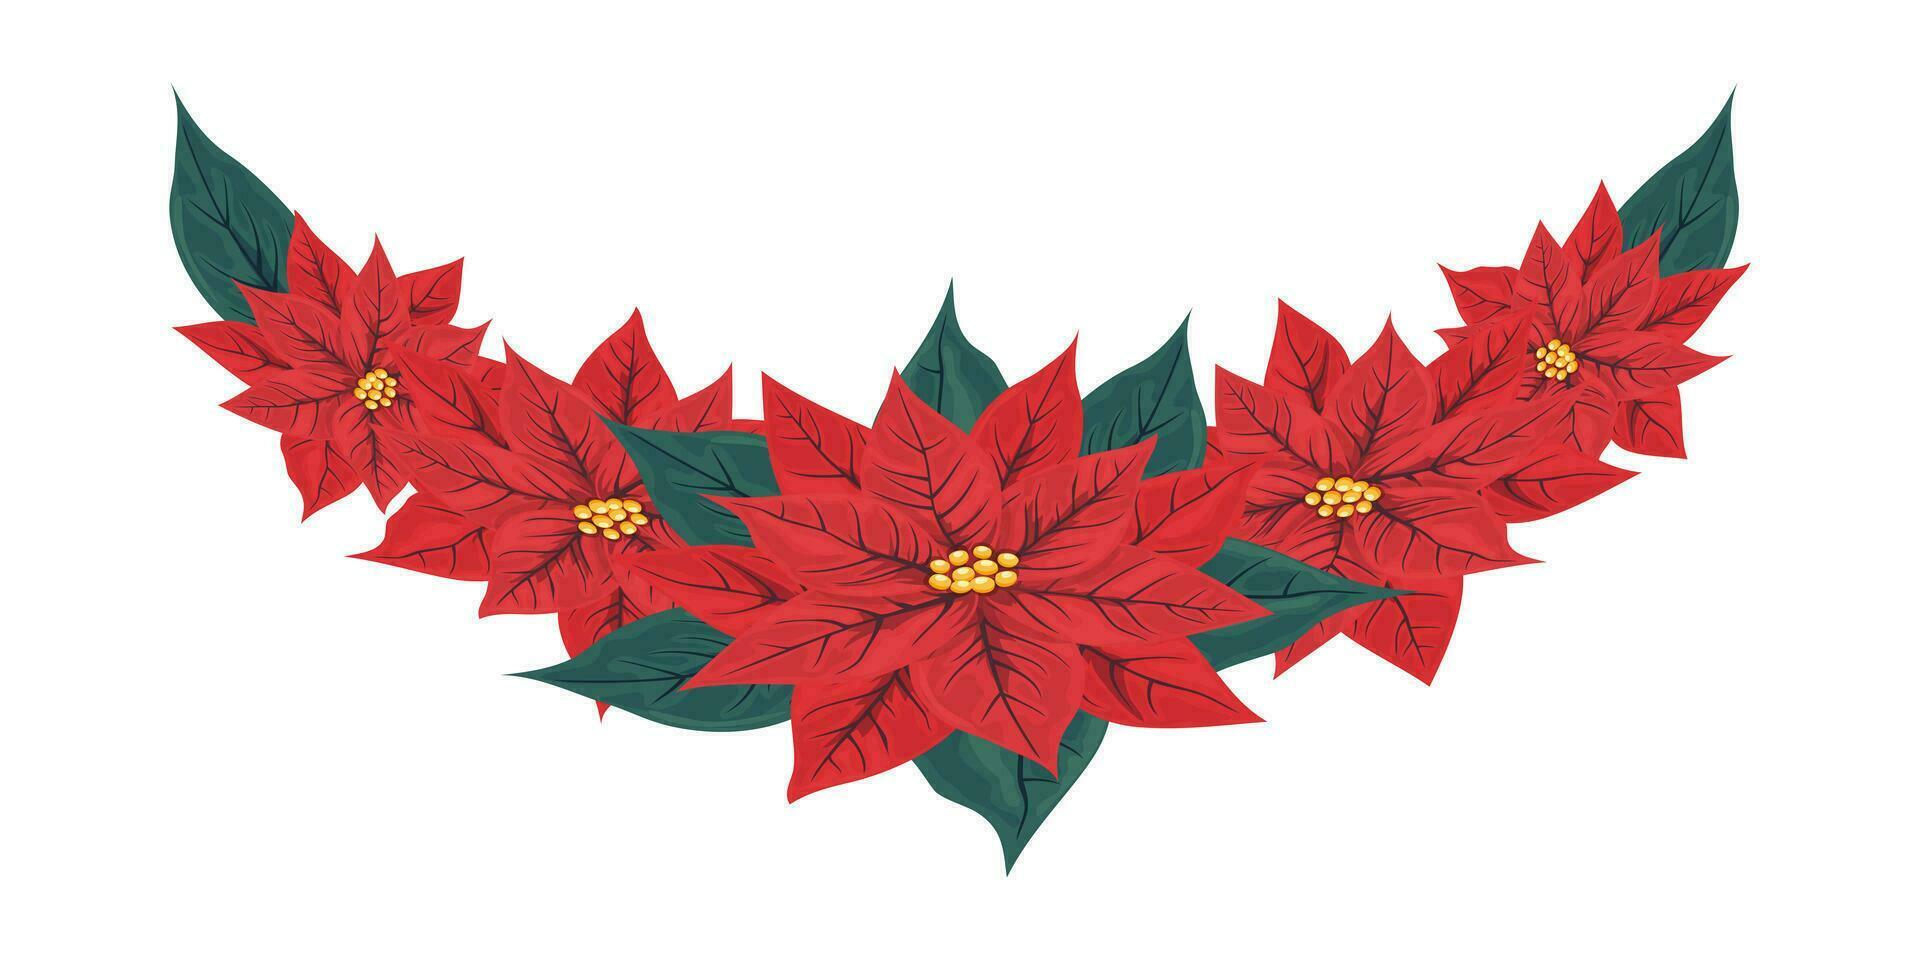 Isolated red poinsettia flower frame, border, divider. Mexican poinsettia plant with red scarlet bracts surrounding the small yellow flowers. A popular houseplant for Christmas or New Year. vector